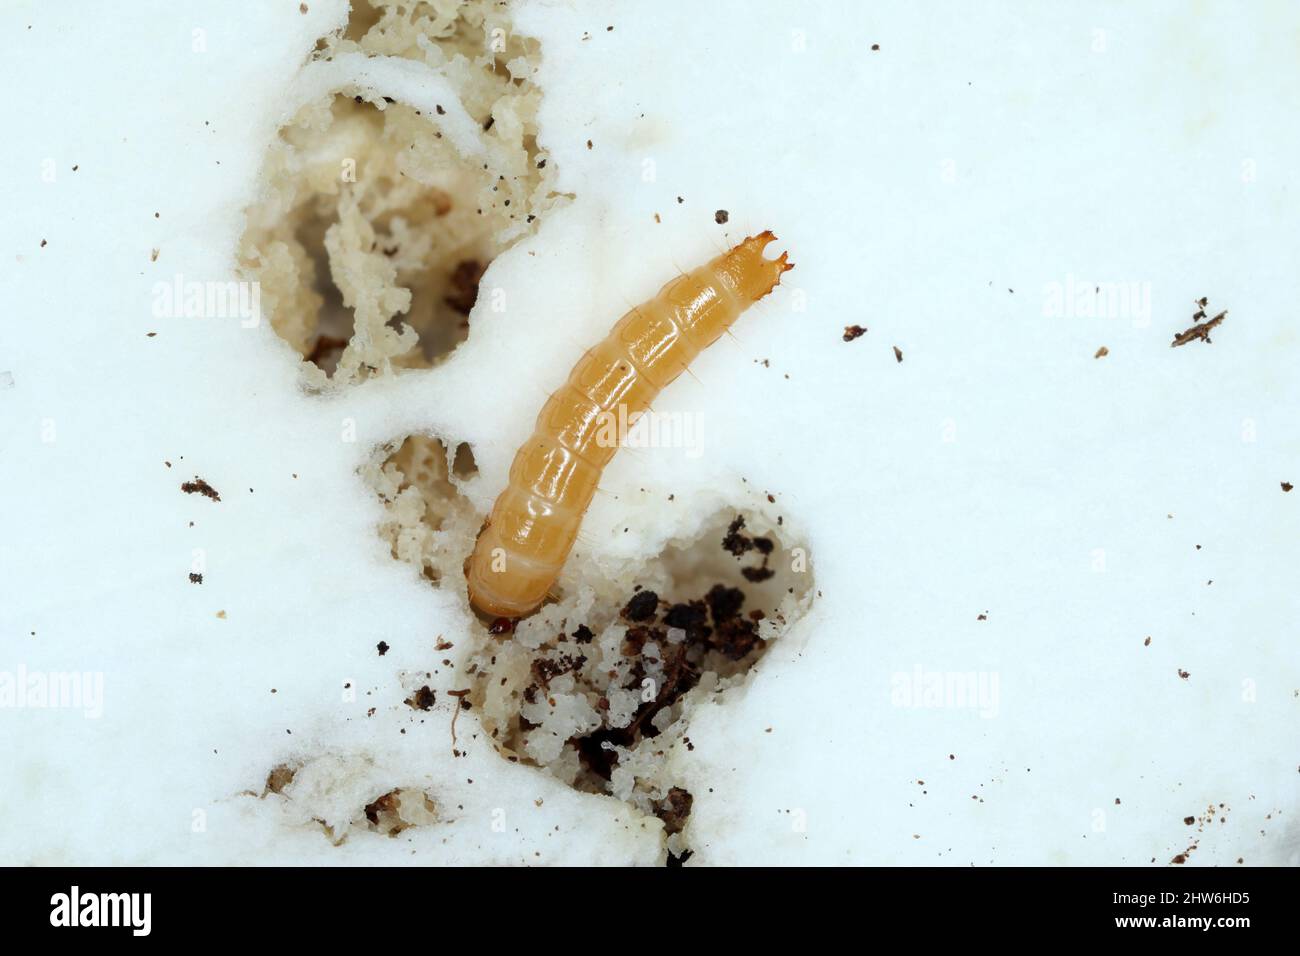 Wireworm (a beetle larva of the  click beetles family - Elateridae) in a mushroom. Stock Photo